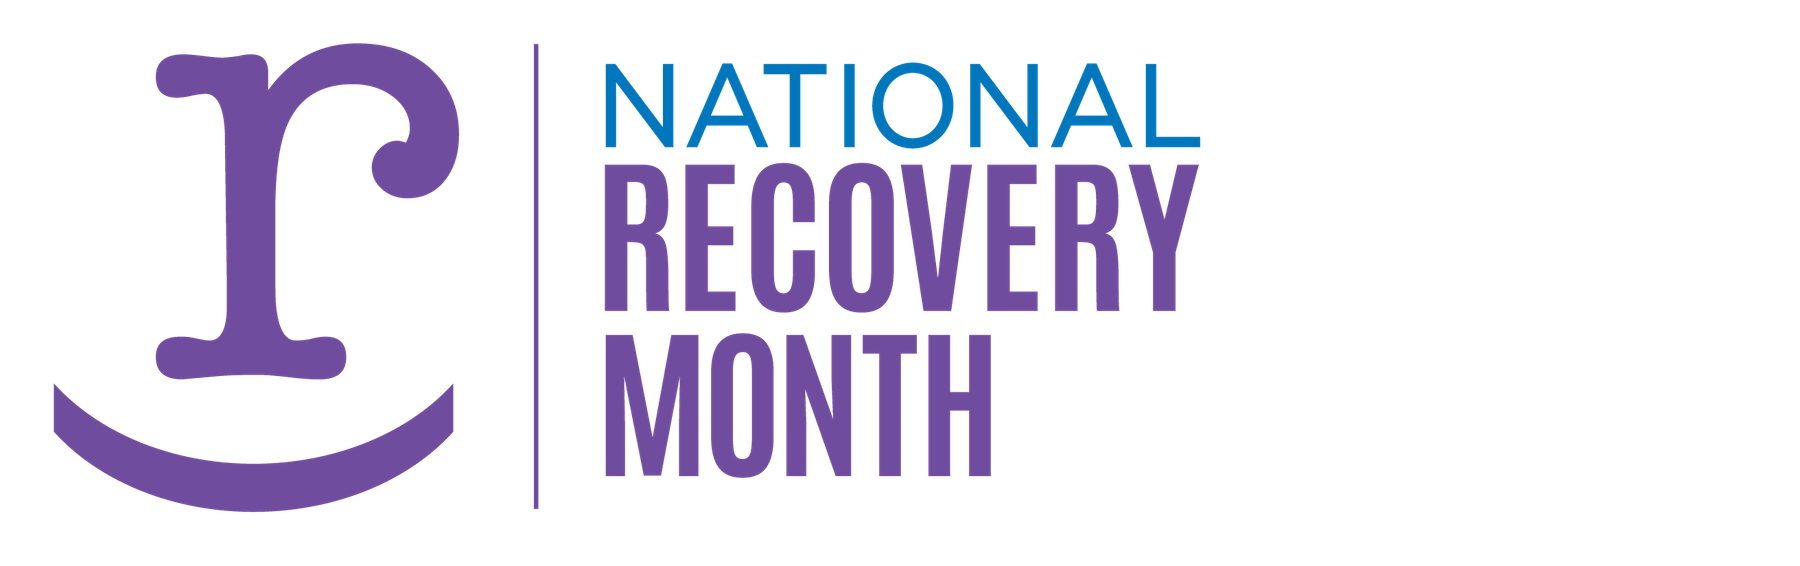 Recovery month logo